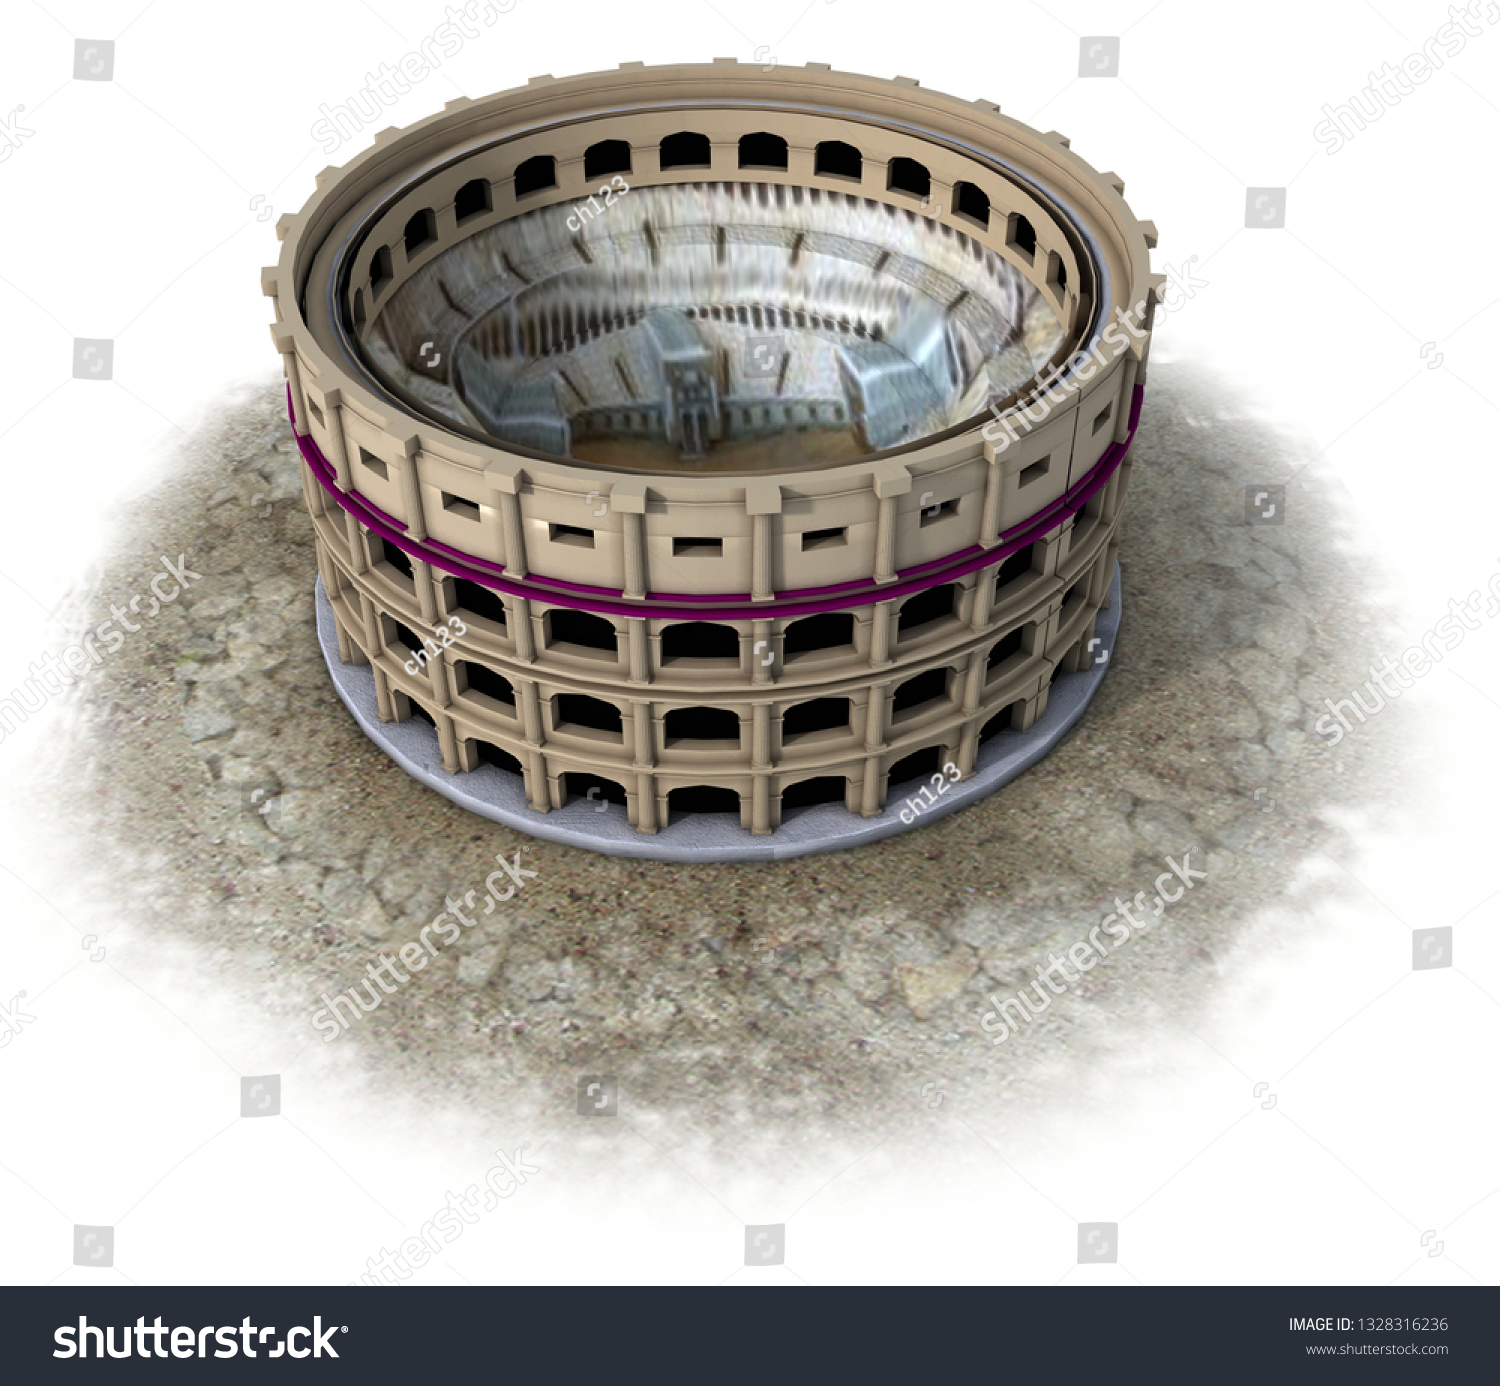 Colosseum Amphitheater Medieval Building 3d Visualization のイラスト素材